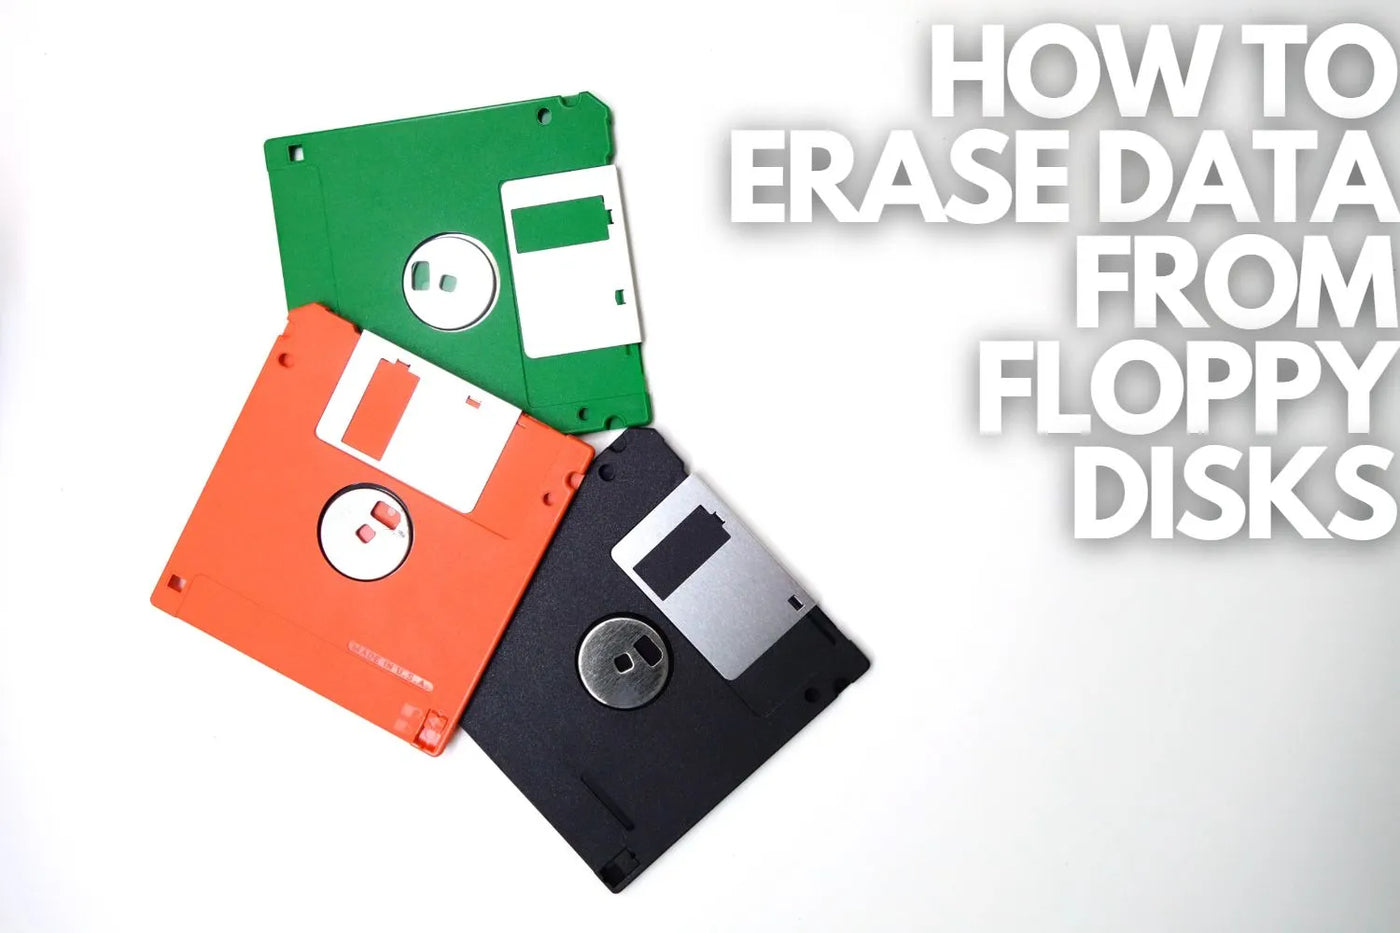 How to Erase Data from Floppy Disks